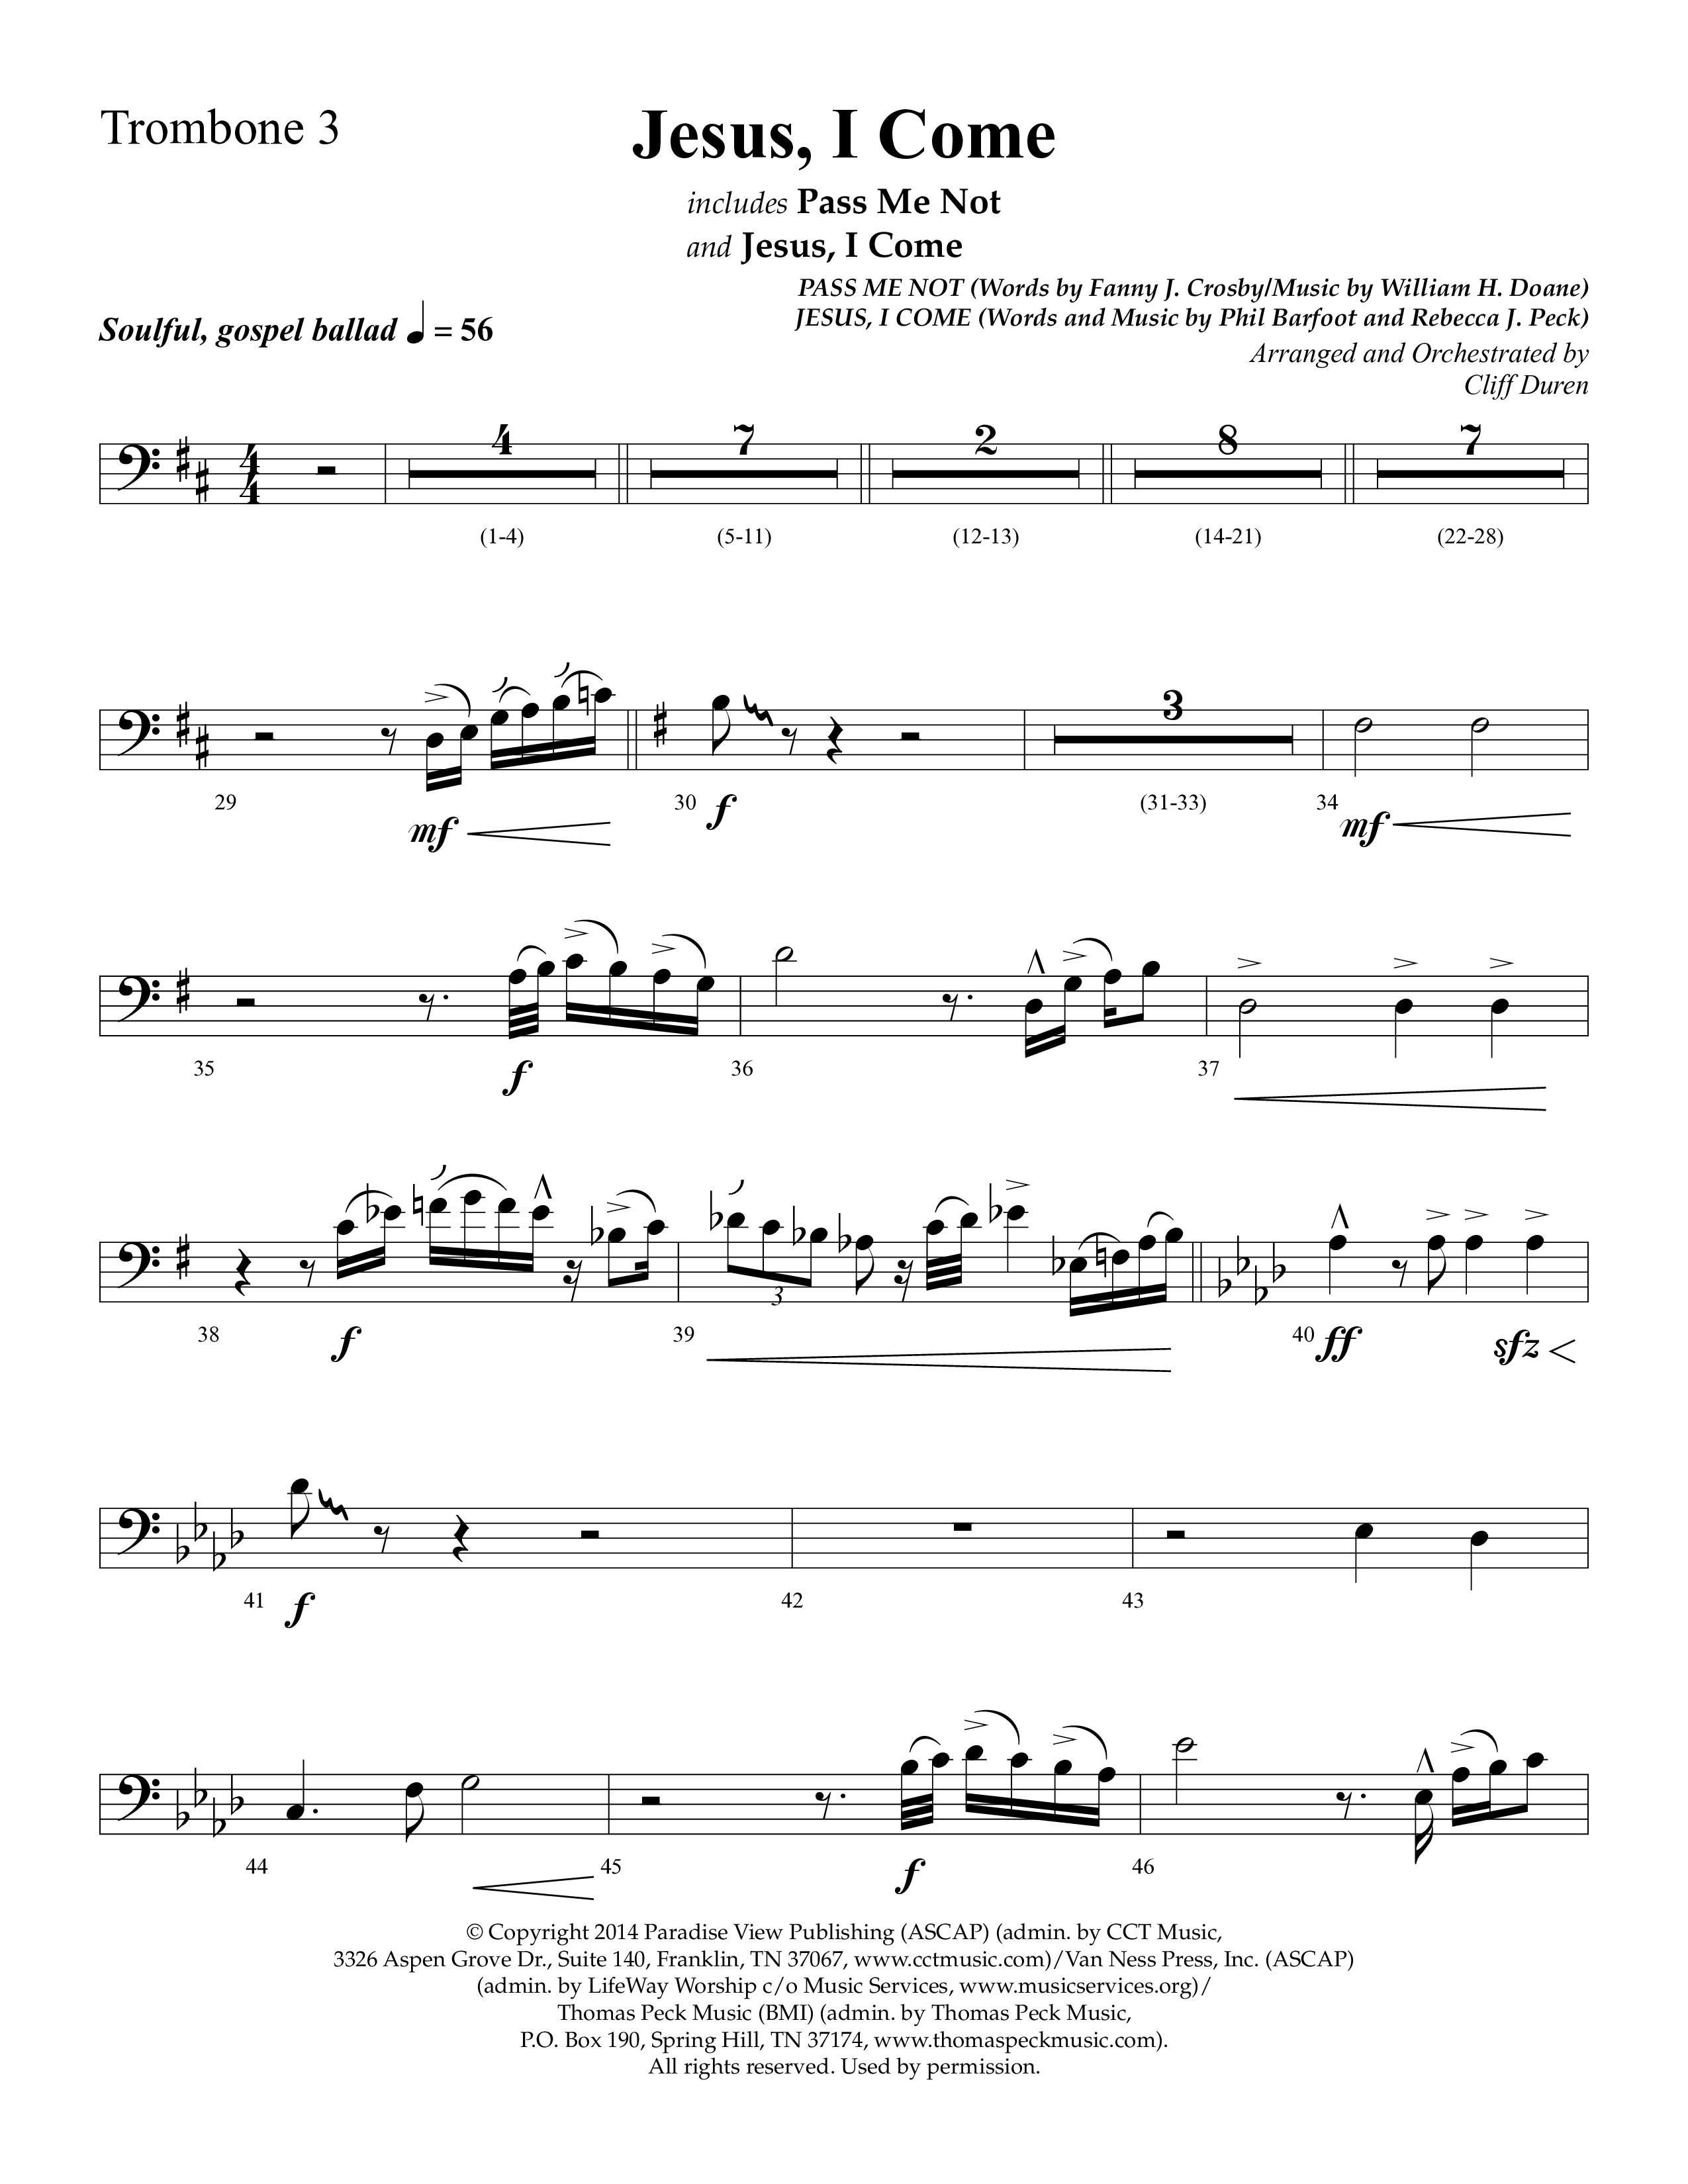 Jesus I Come (with Pass Me Not) (Choral Anthem SATB) Trombone 3 (Lifeway Choral / Arr. Cliff Duren)